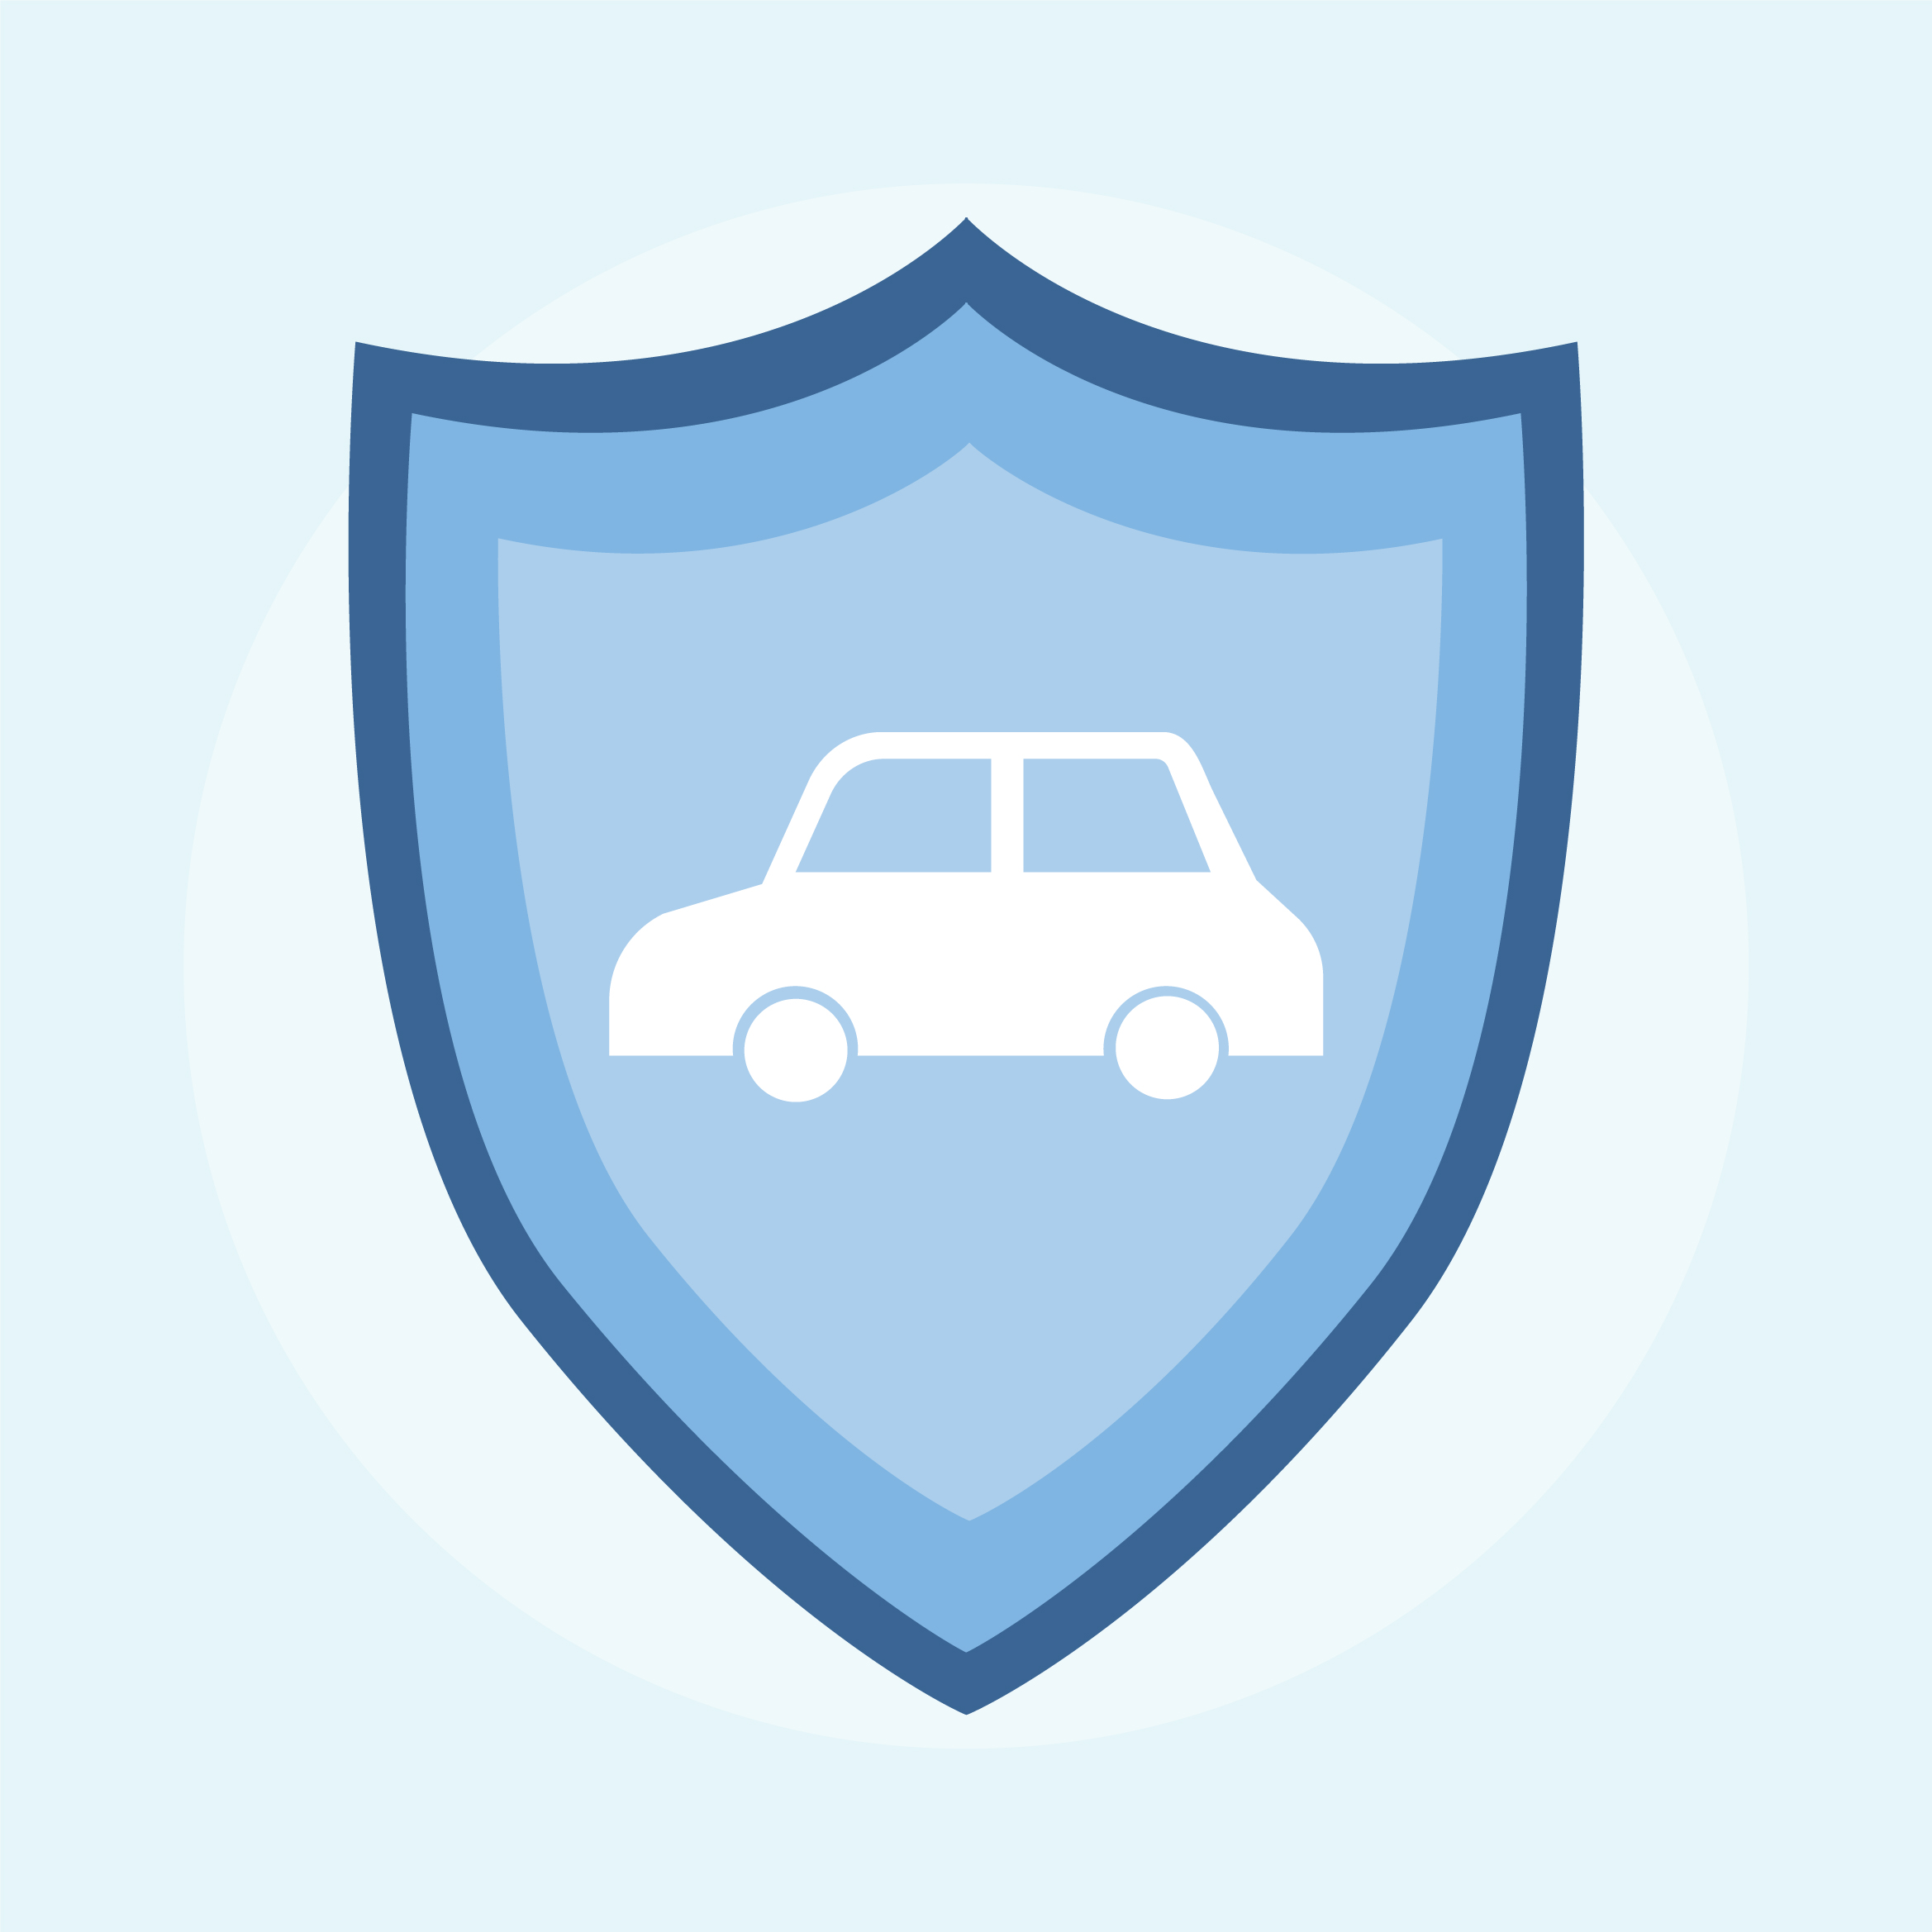 Illustration of a car insurance icon - Download Free Vectors, Clipart ...